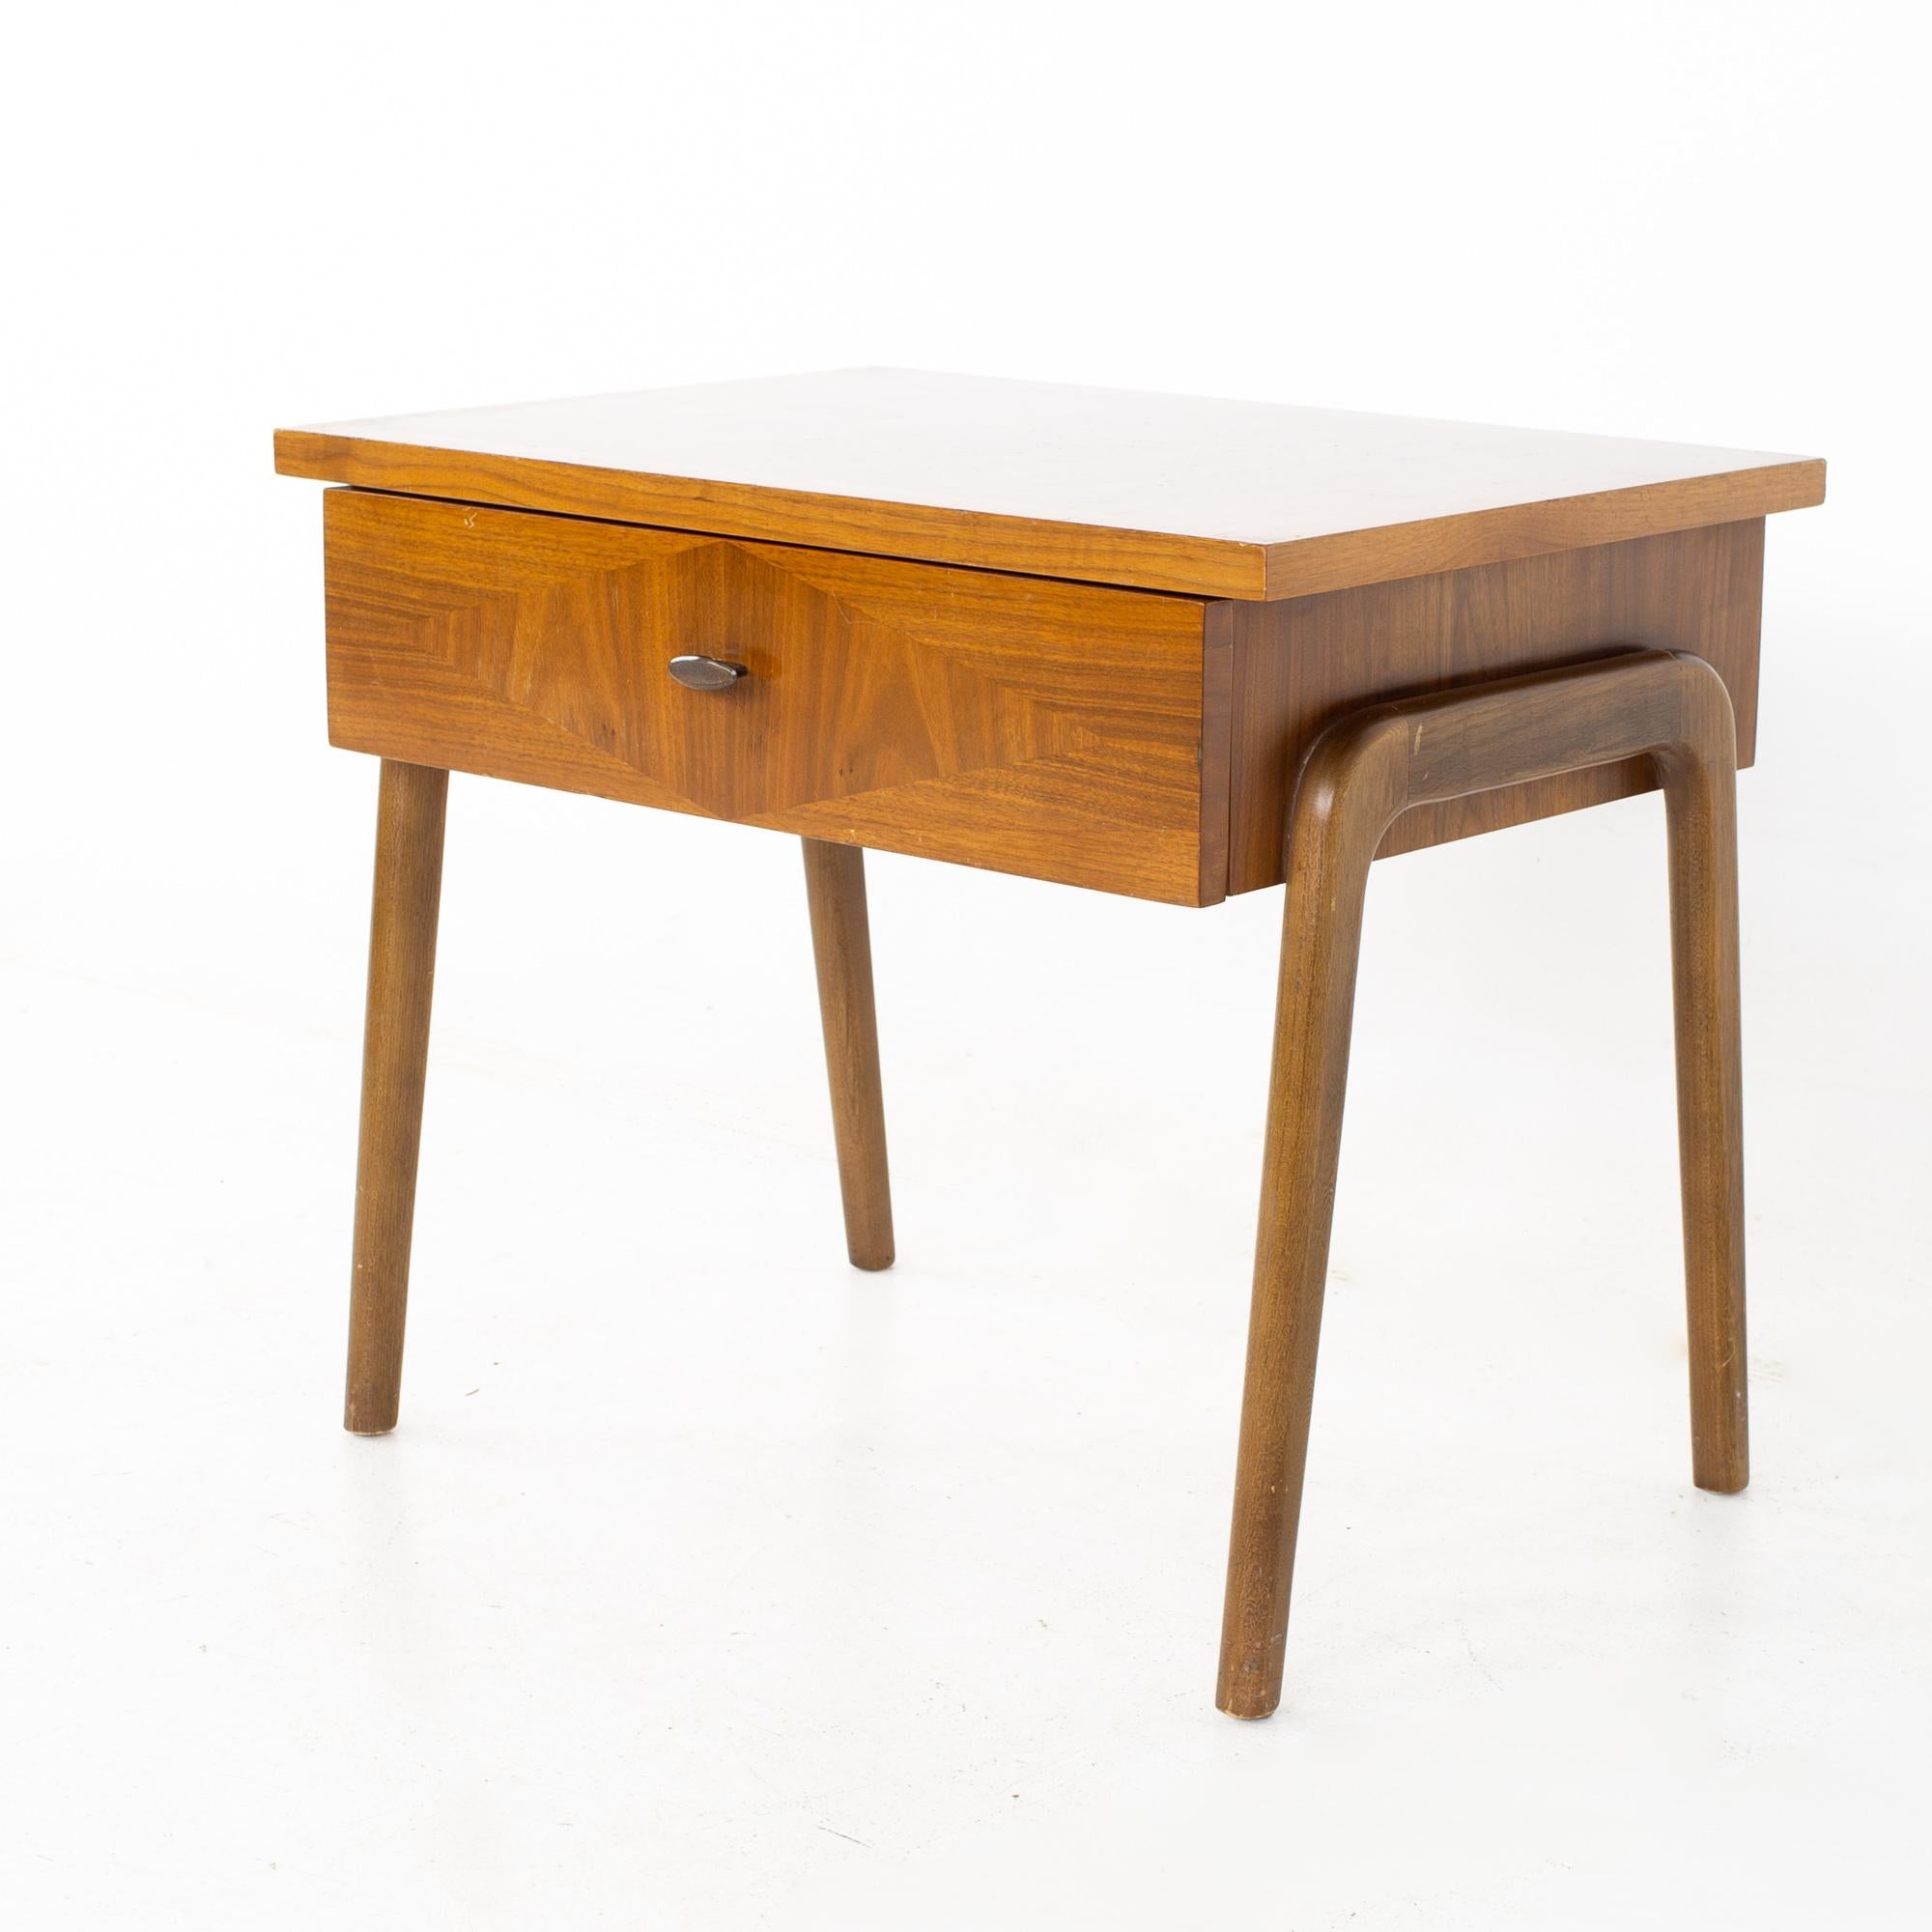 Lane Harlequin mid century inlaid walnut side table nightstand
Nightstand measures: 24 wide x 17 deep x 20.25 inches high

All pieces of furniture can be had in what we call restored vintage condition. That means the piece is restored upon